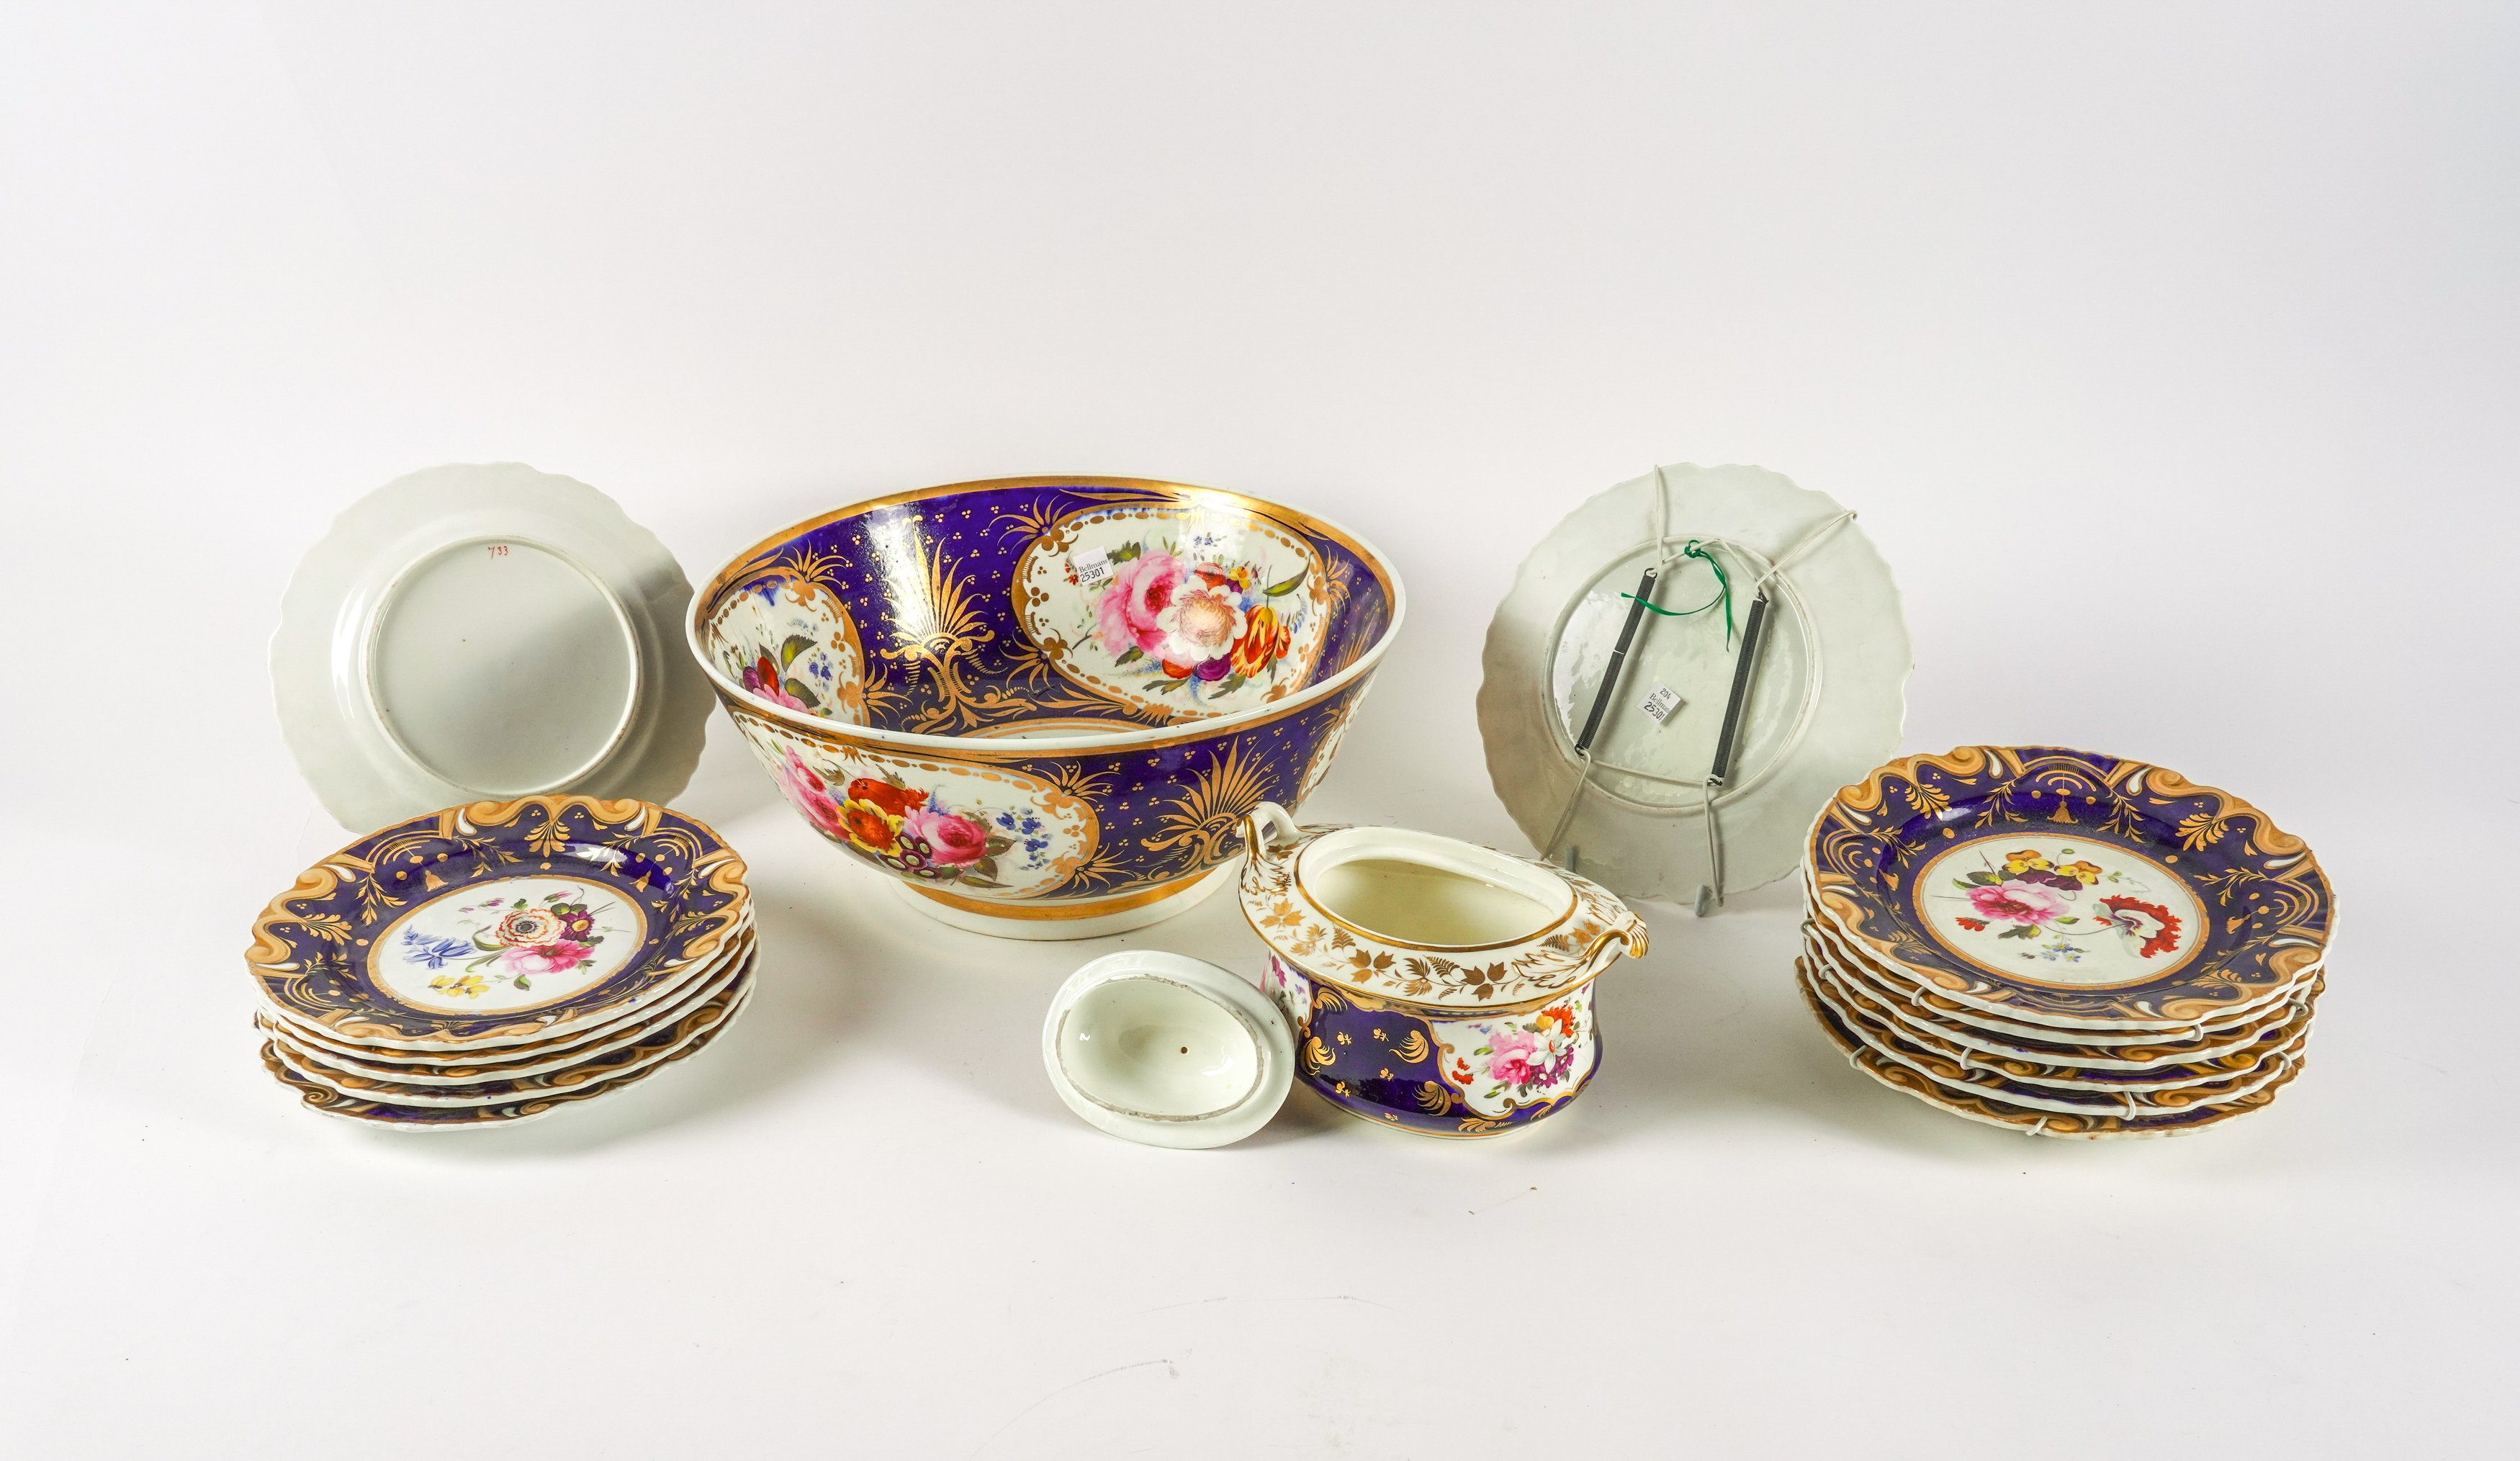 A GROUP OF ENGLISH BLUE-GROUND PORCELAINS PAINTED WITH FLOWERS (16) - Image 2 of 2